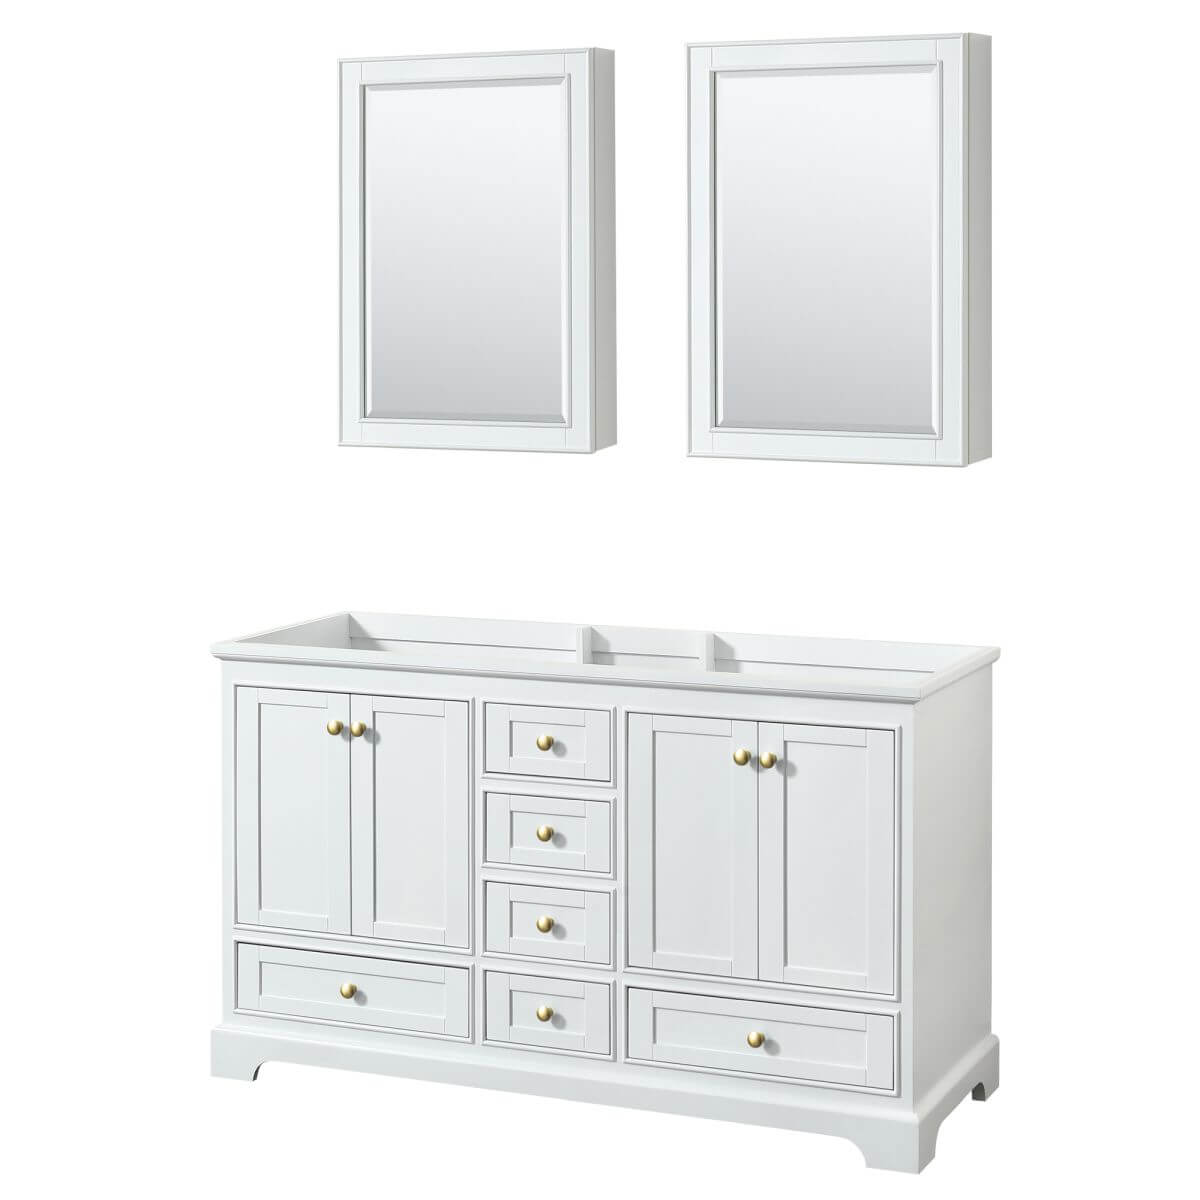 Wyndham Collection Deborah 60 inch Double Bathroom Vanity in White with Medicine Cabinets, Brushed Gold Trim, No Countertop and No Sinks - WCS202060DWGCXSXXMED